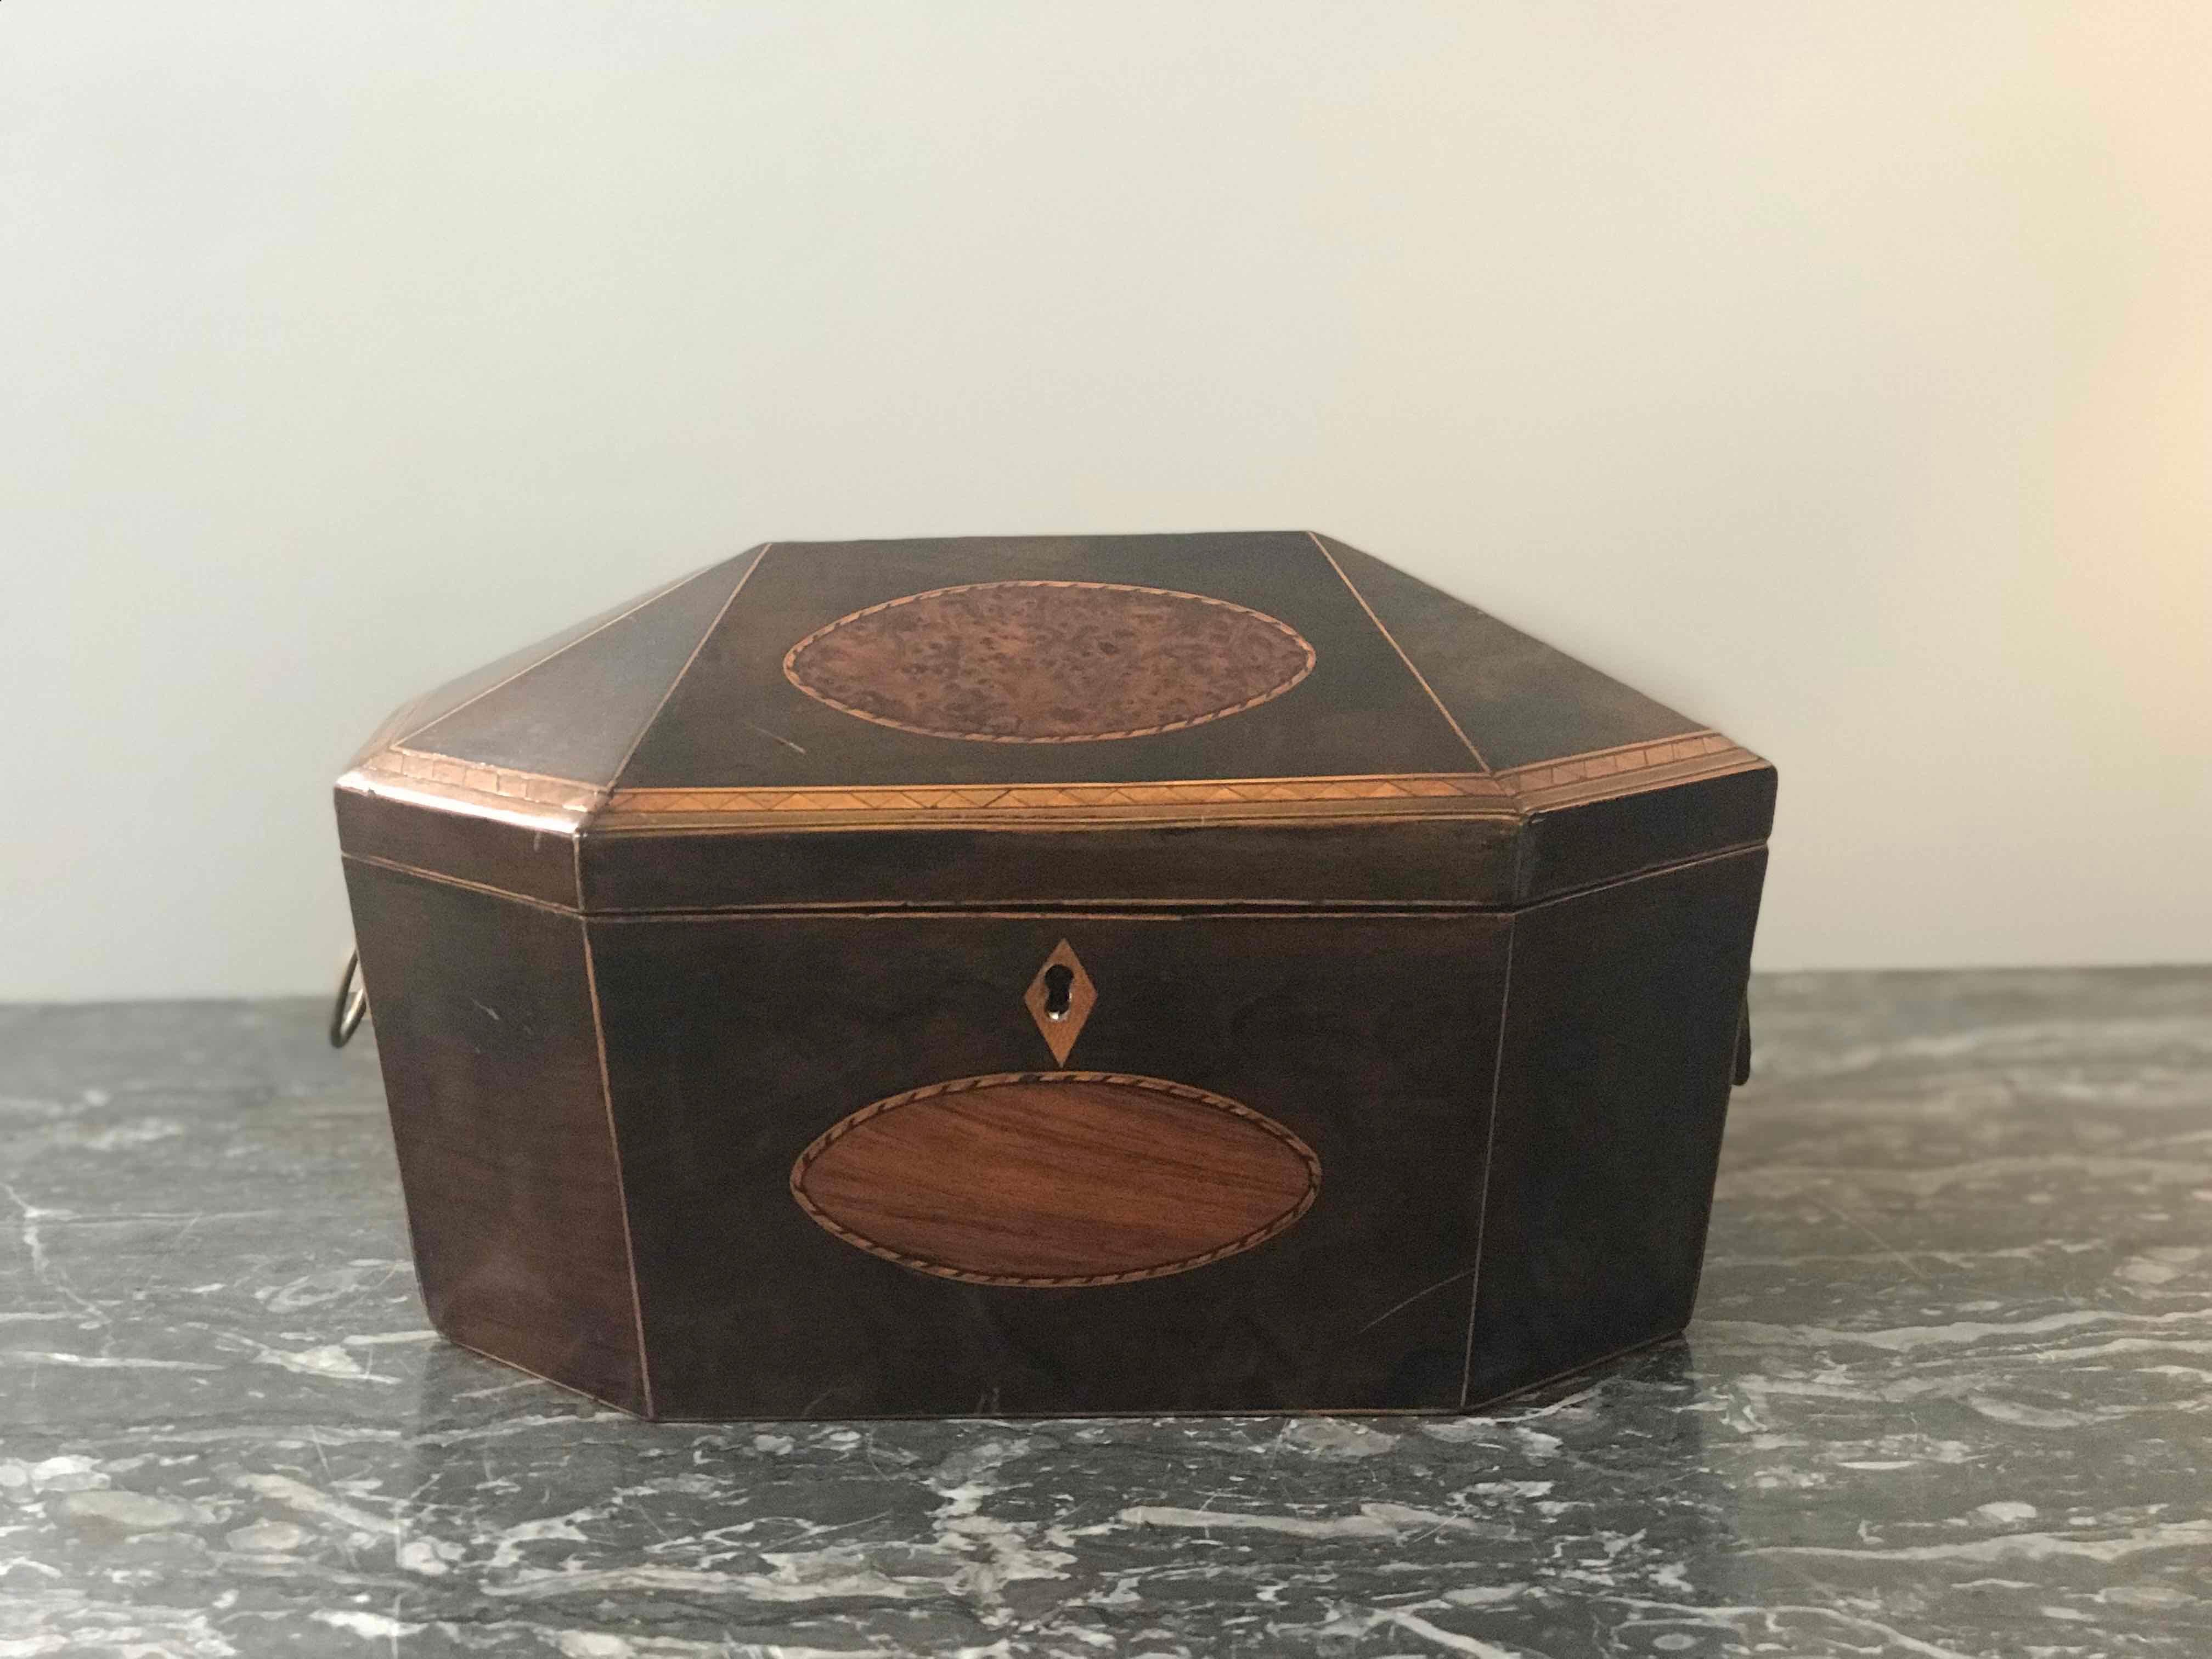 18th century box in burl yew wood. Originating in England, dating to 1780. 